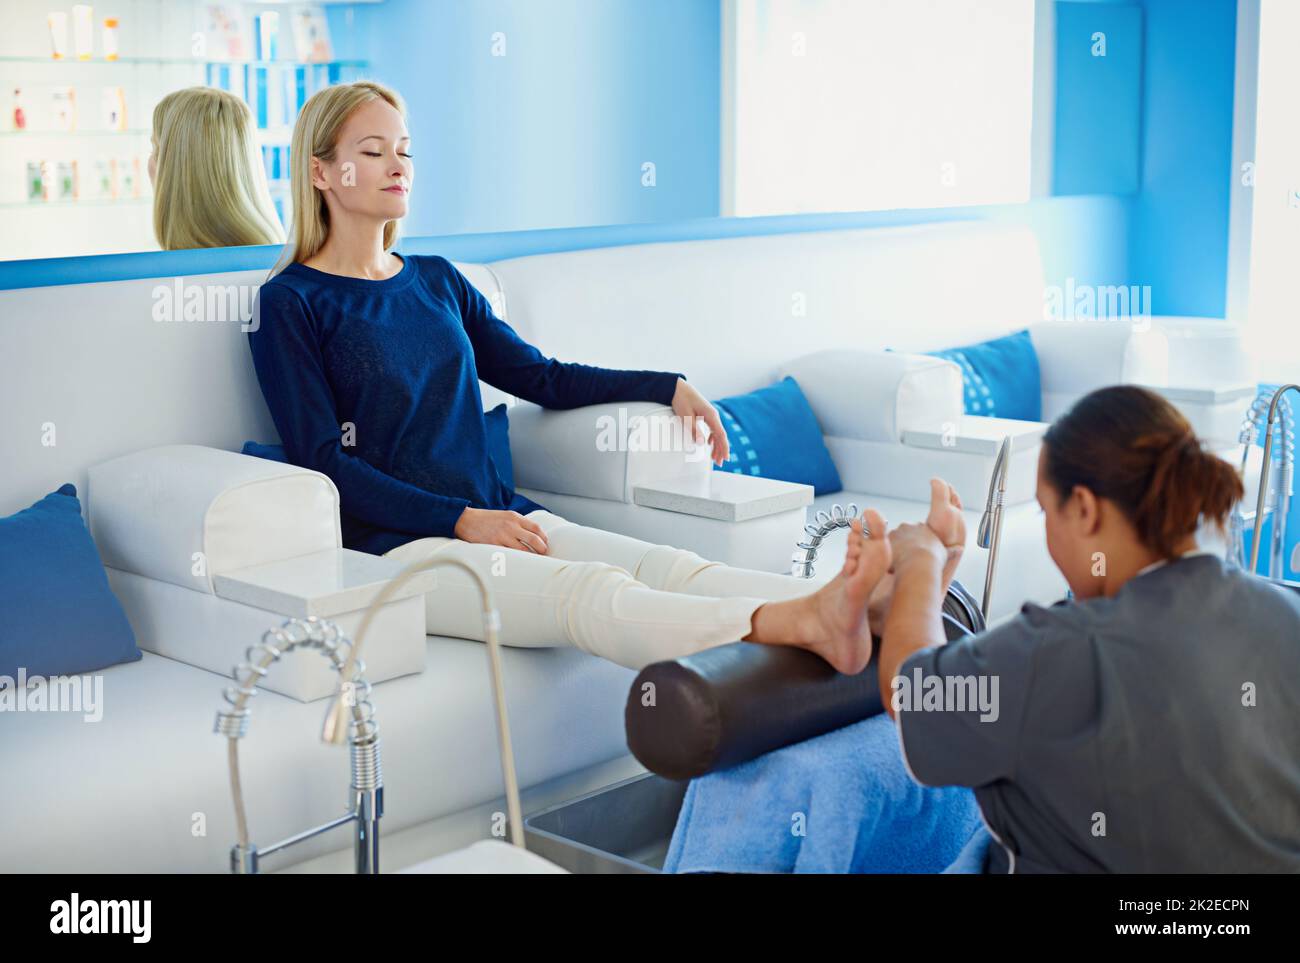 The best cure is a pedicure. Shot of a woman having her feet massaged at a beauty spa. Stock Photo